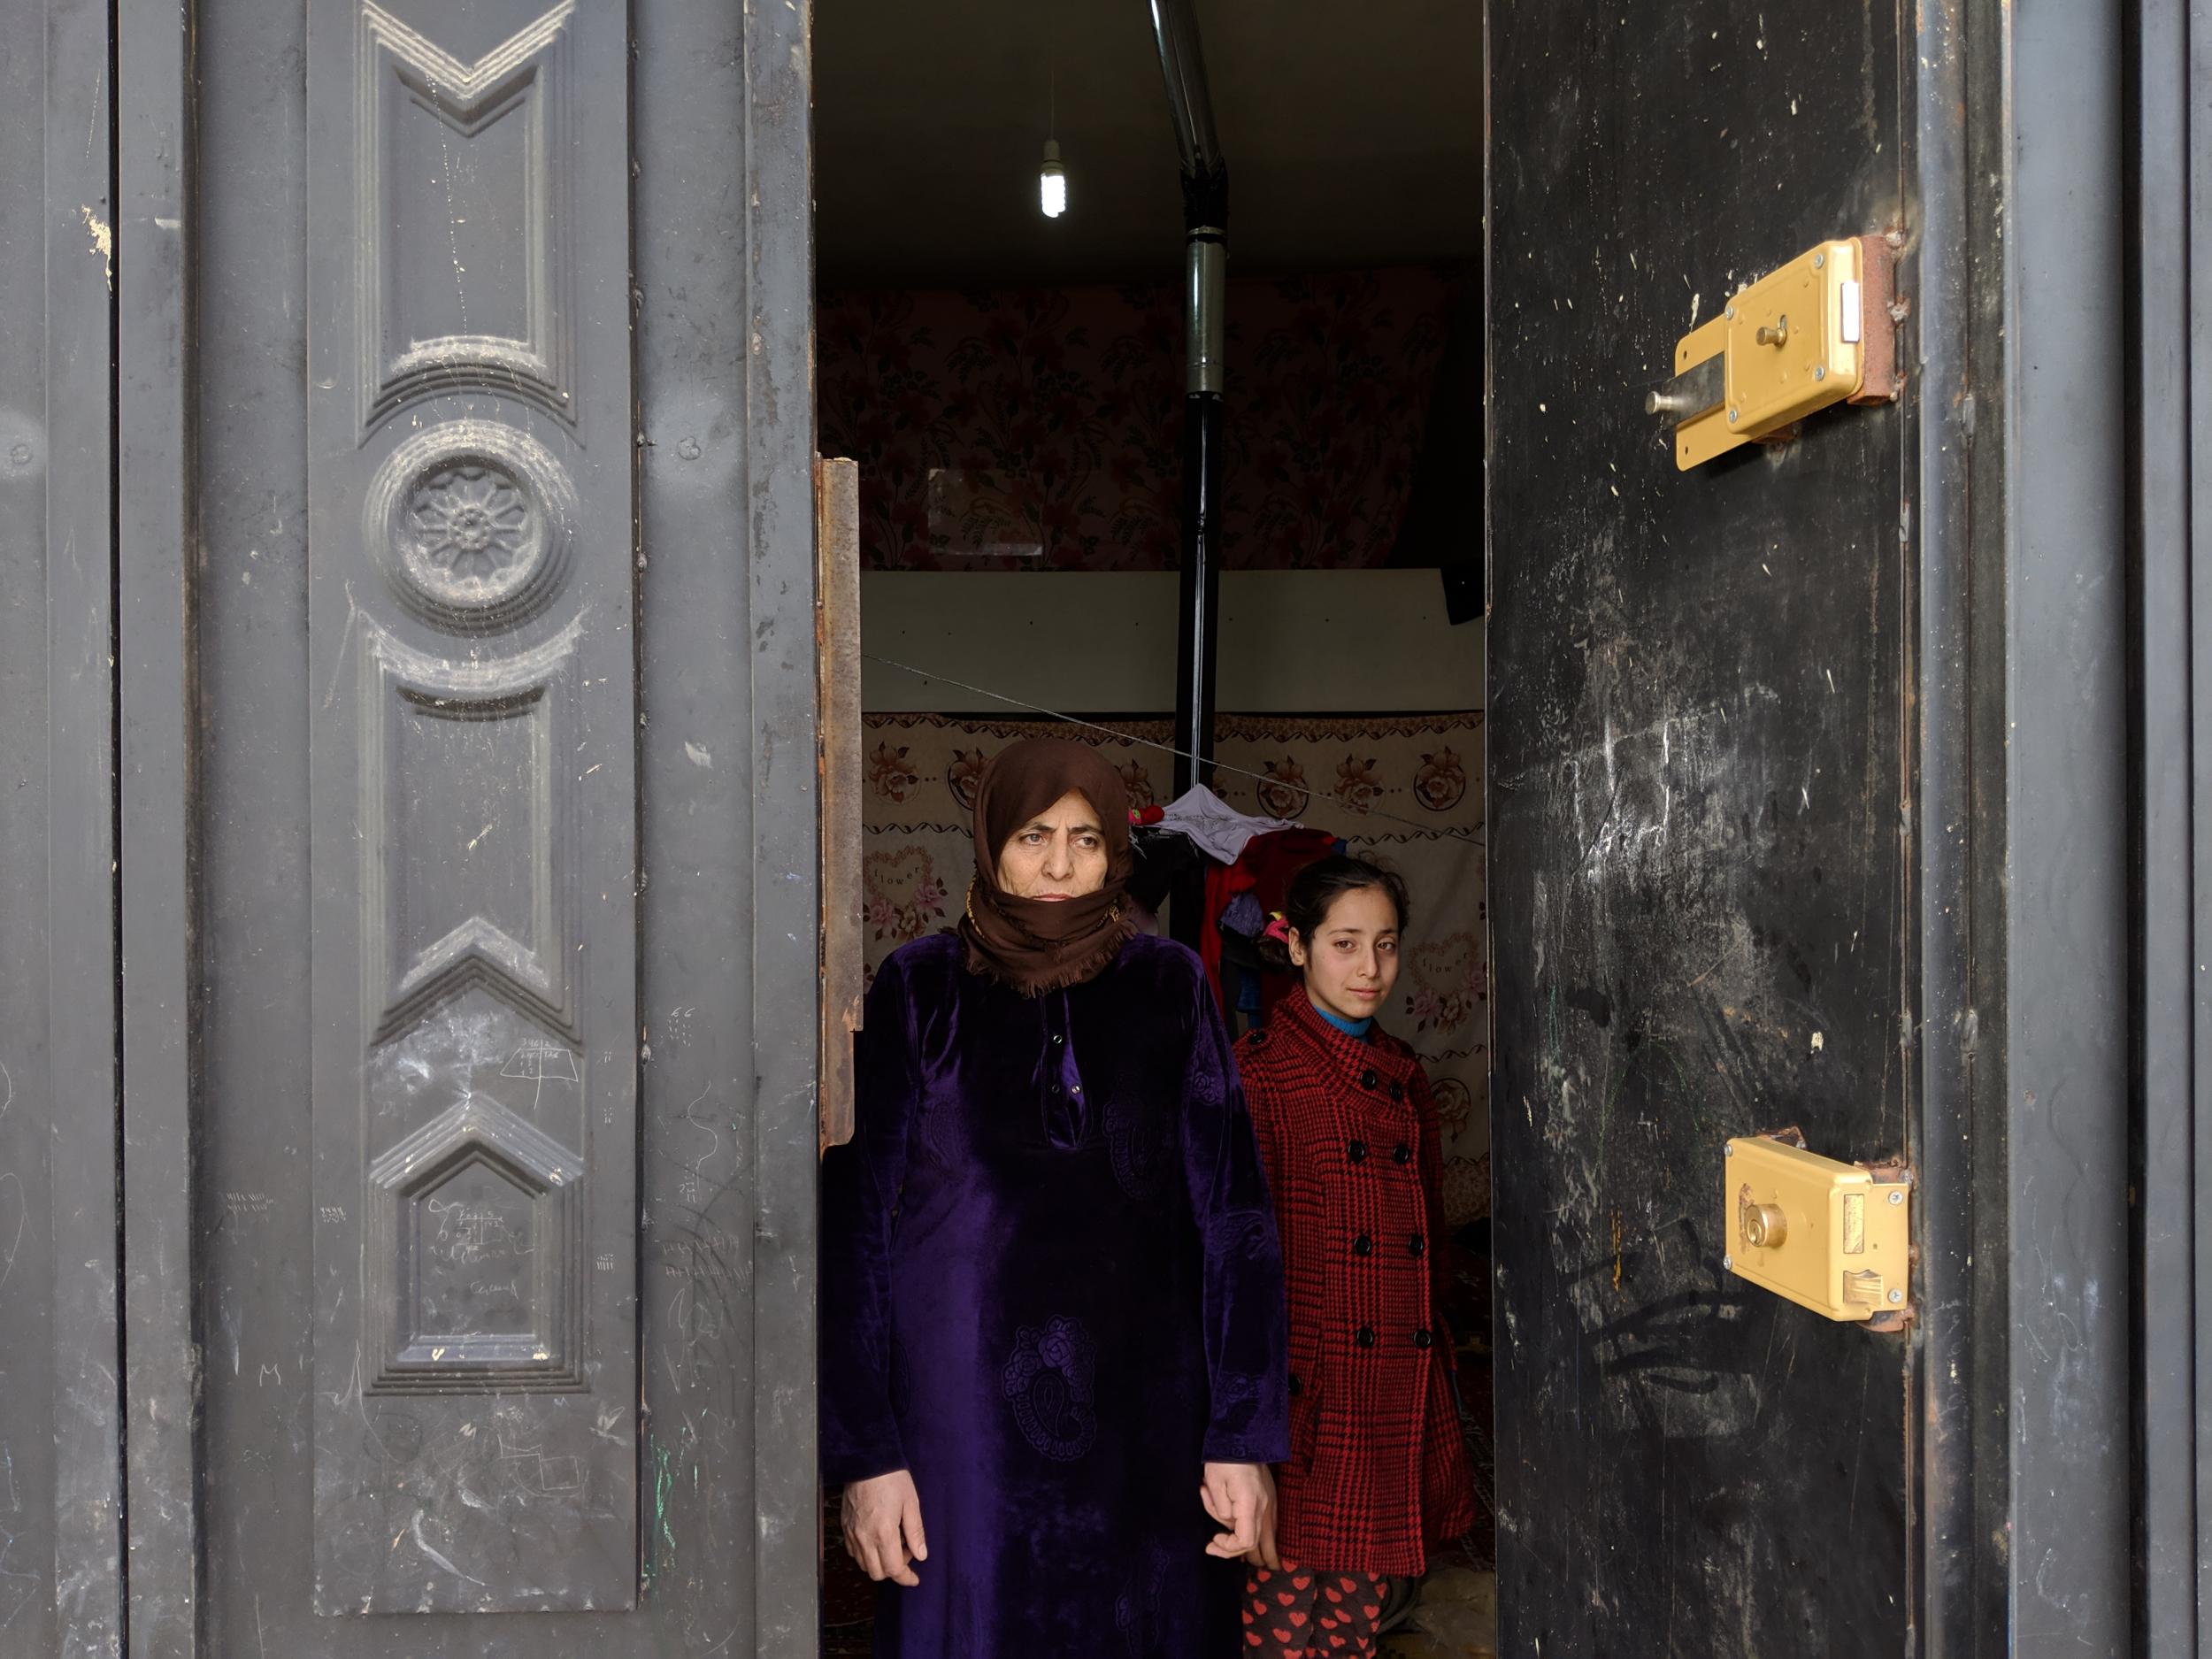 Syrian refugees Jose Ahmad al-Jessi, a mother of eight in her 50s, and her daughter Raghad stand in the doorway of a shop warehouse where they fled to when their tent flooded on Tuesday